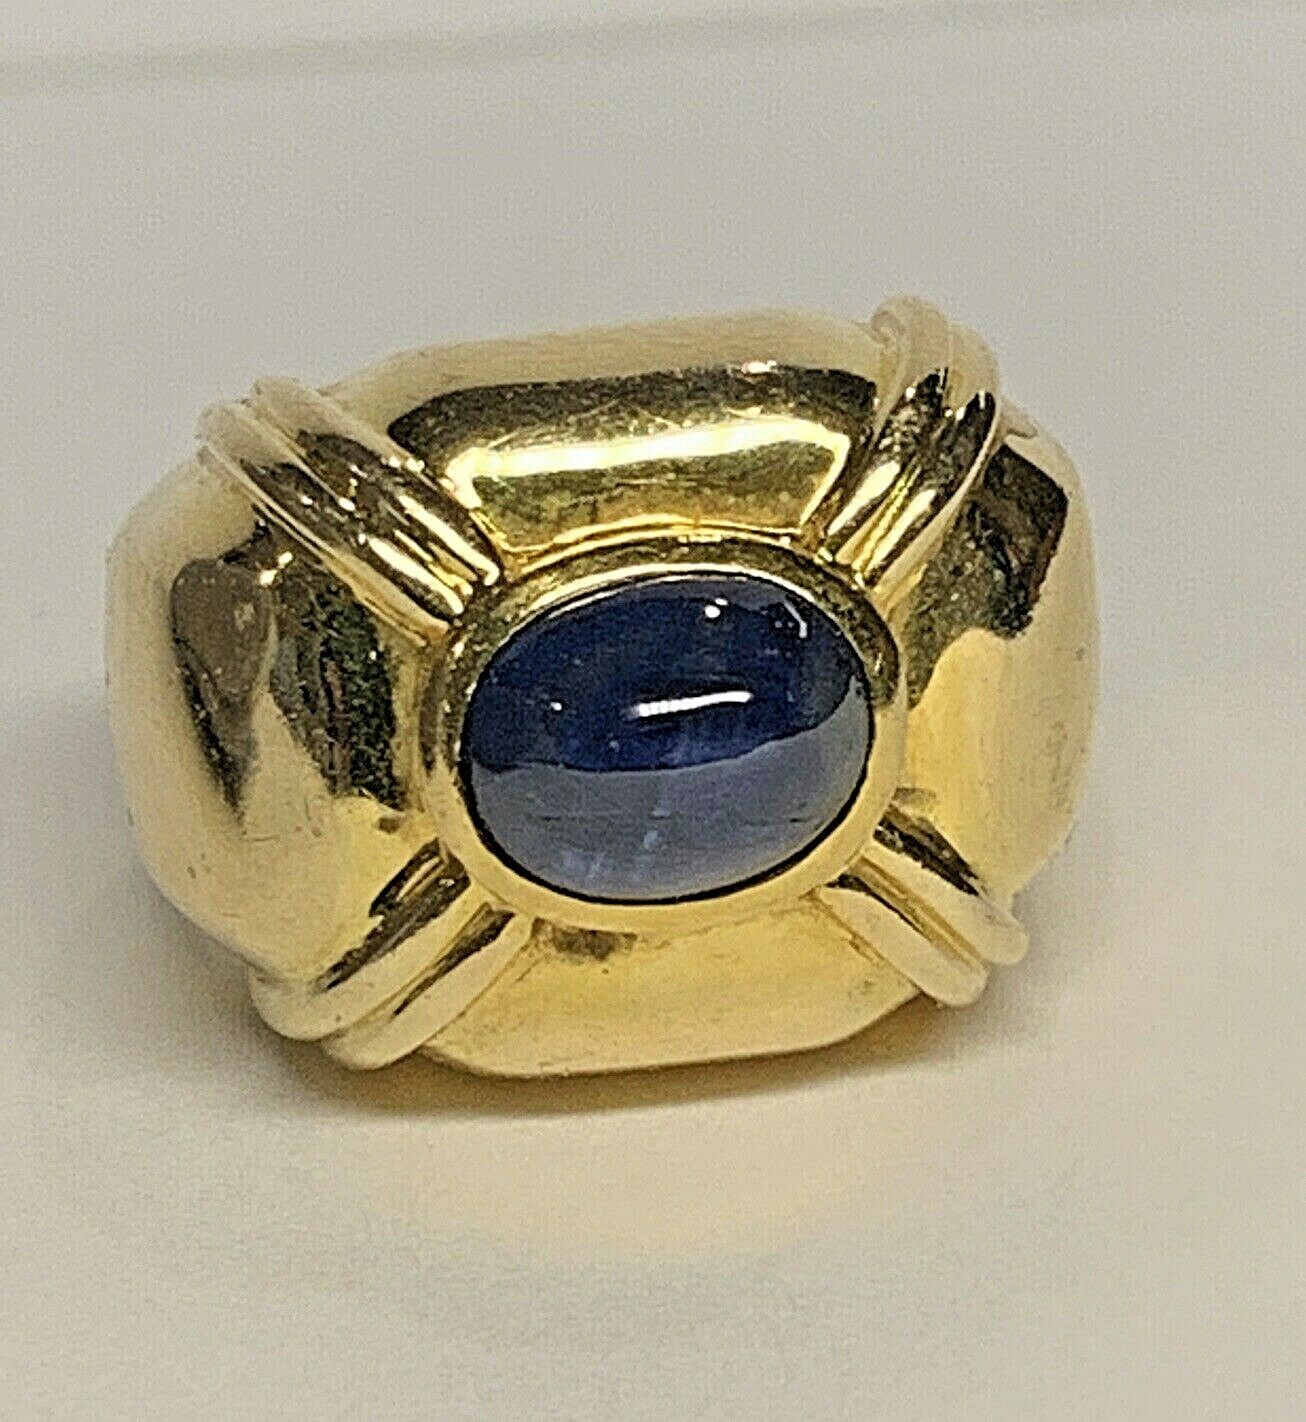 18k 750 Gold Blue Sapphire Cabochon Cocktail Ring - Solid 13.7 Grams - Size 5